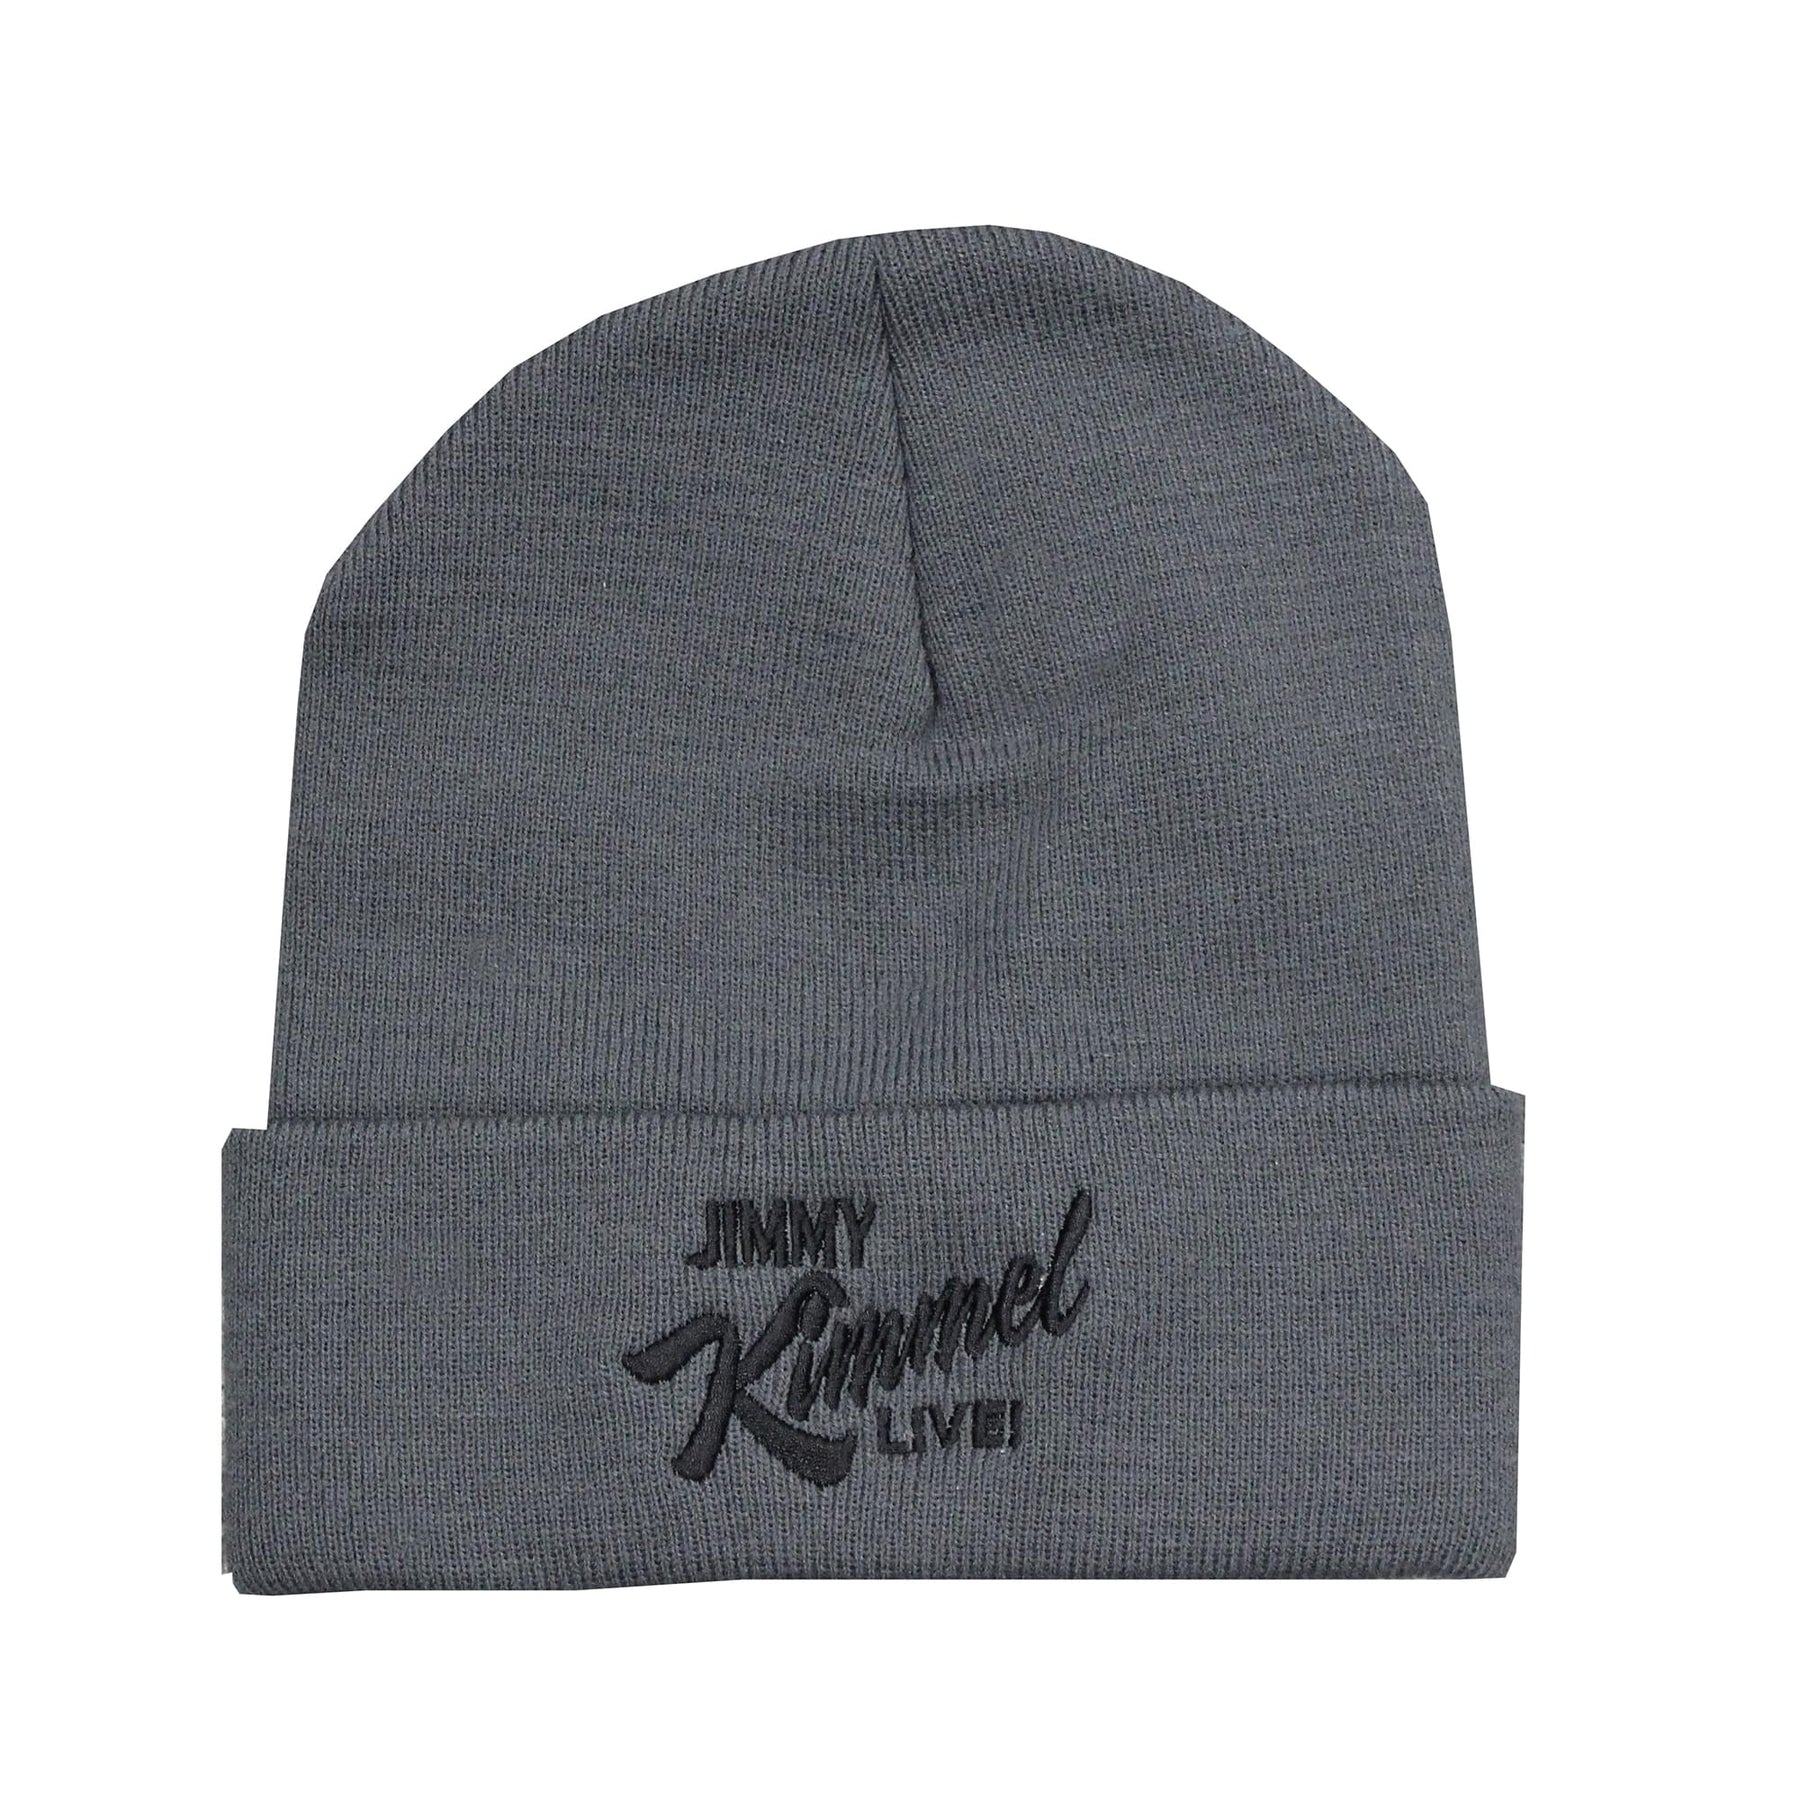 Jimmy Kimmel Live! 12 Inch Charcoal Knit Cuff Beanie | Adult One Size